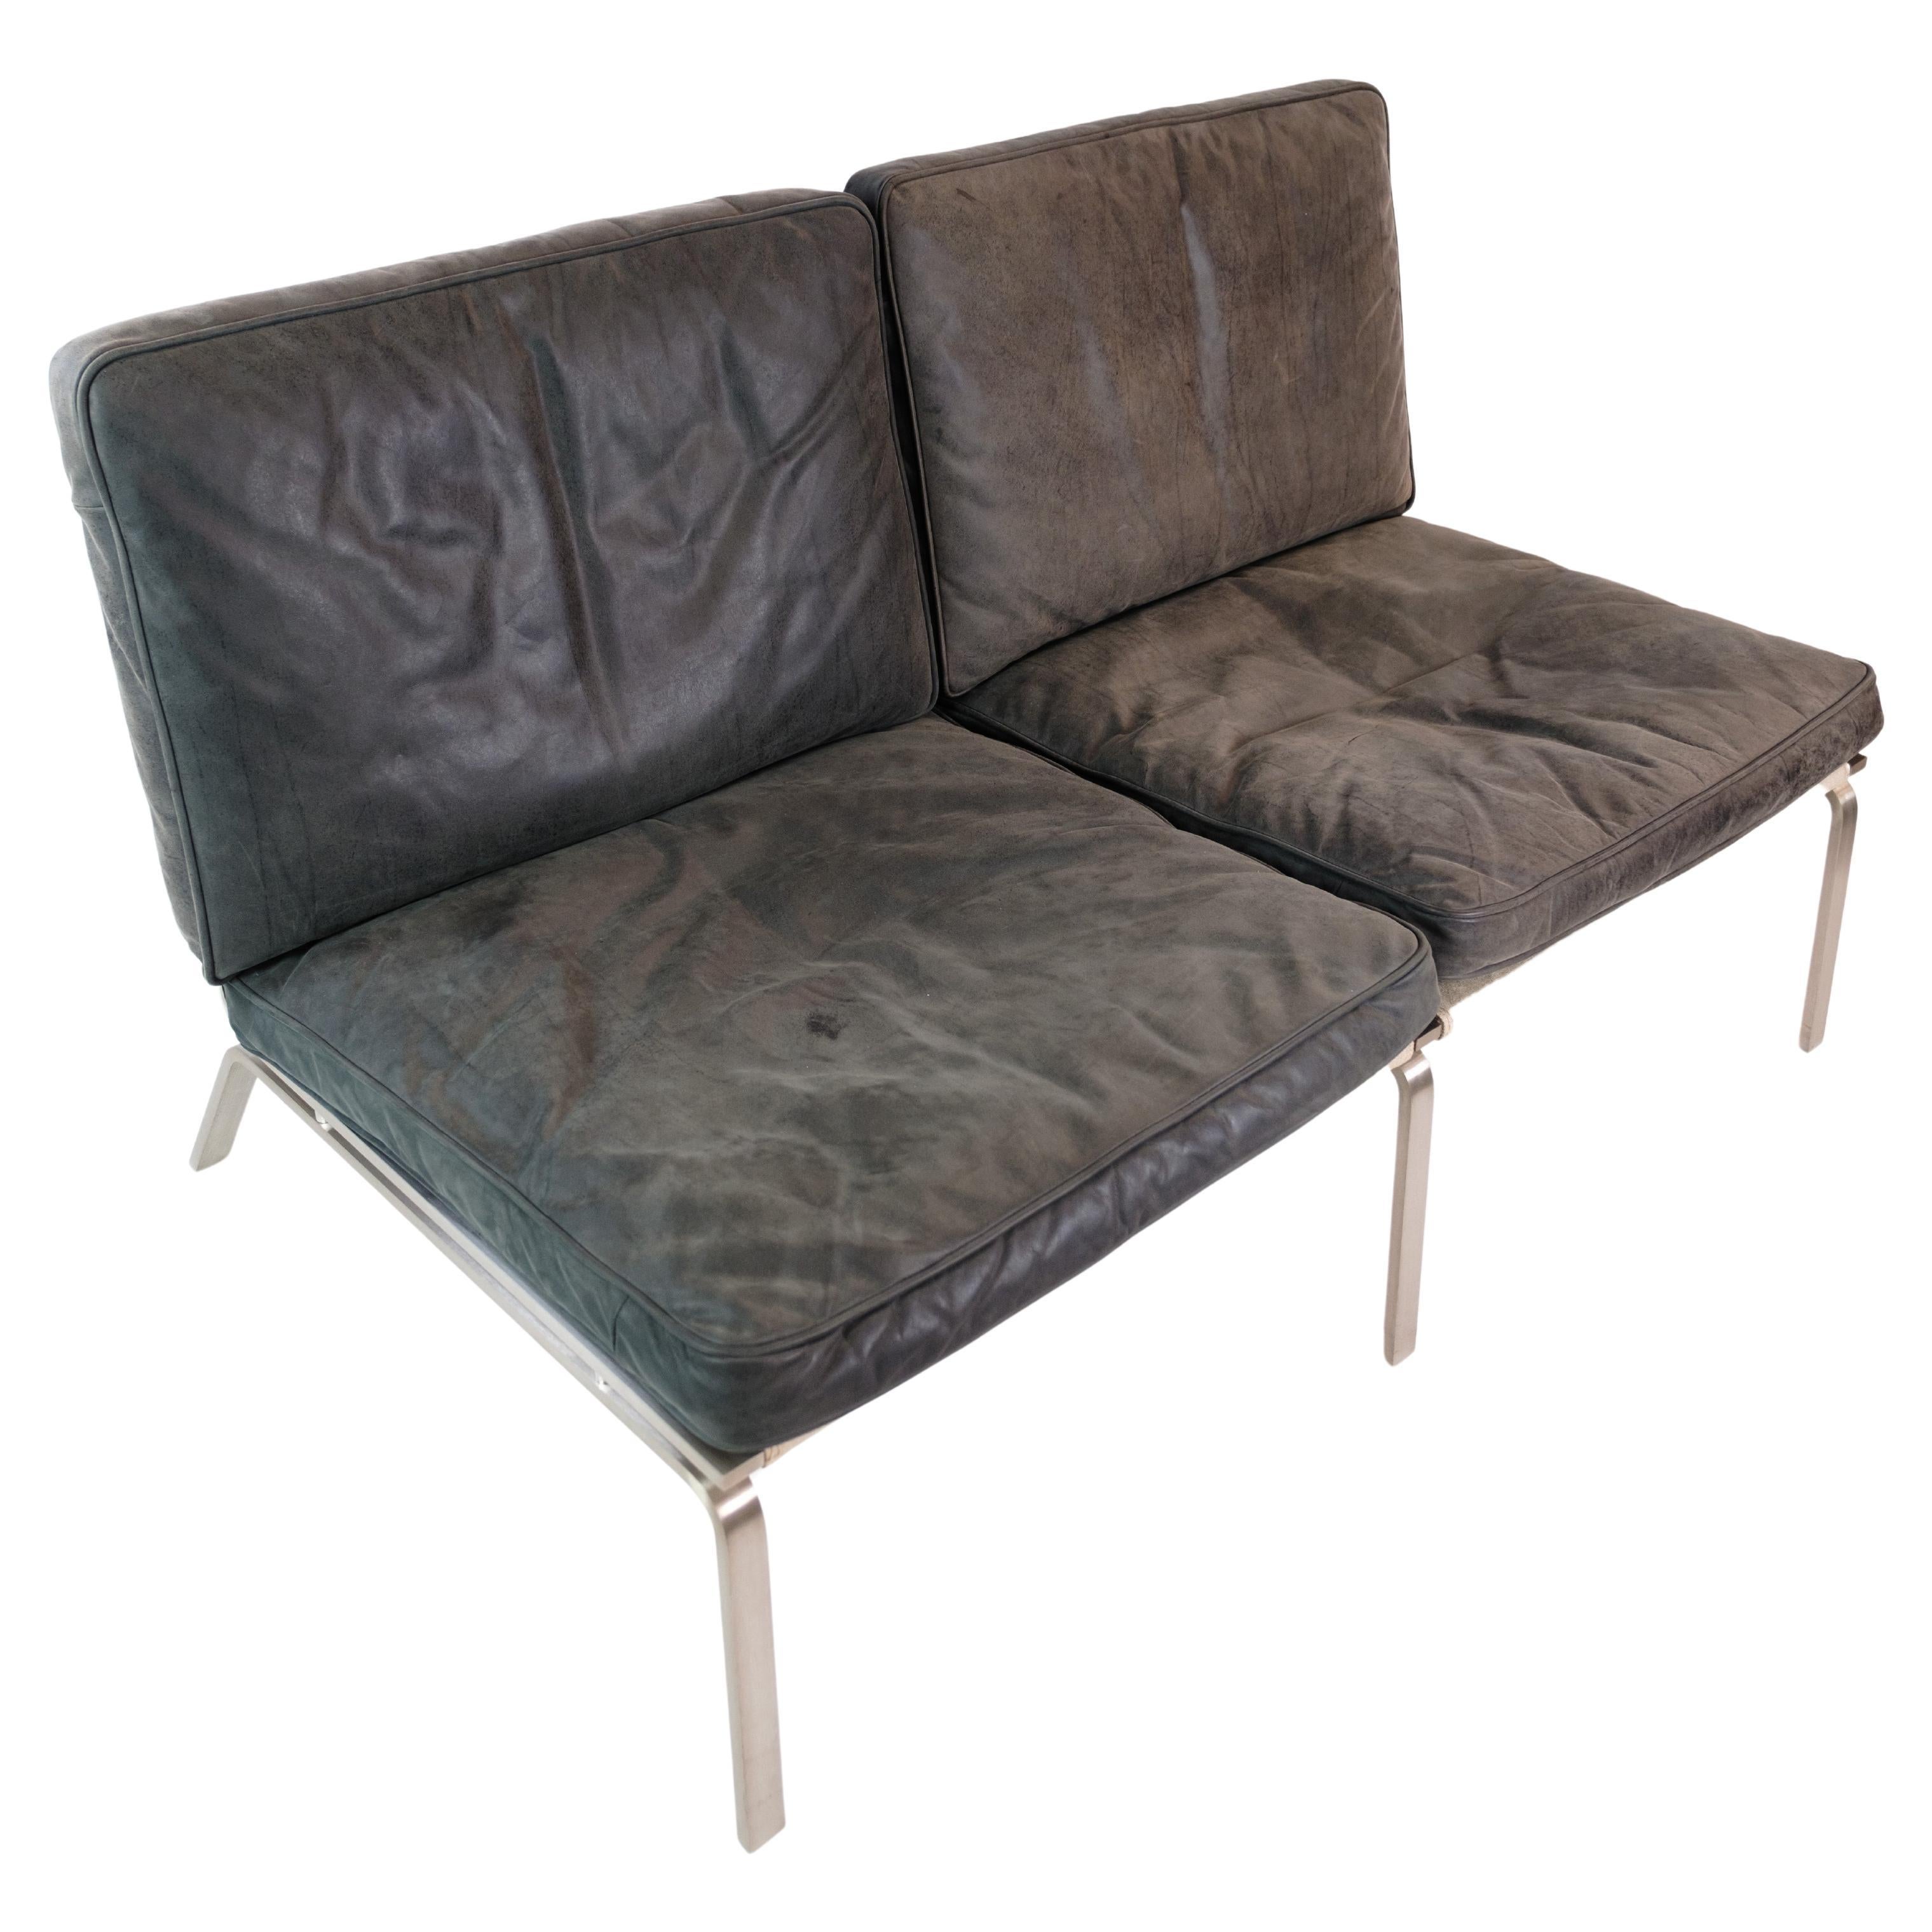 2-Person Sofa From Norr11 Made With Black Leather Cushions From 2000s For Sale